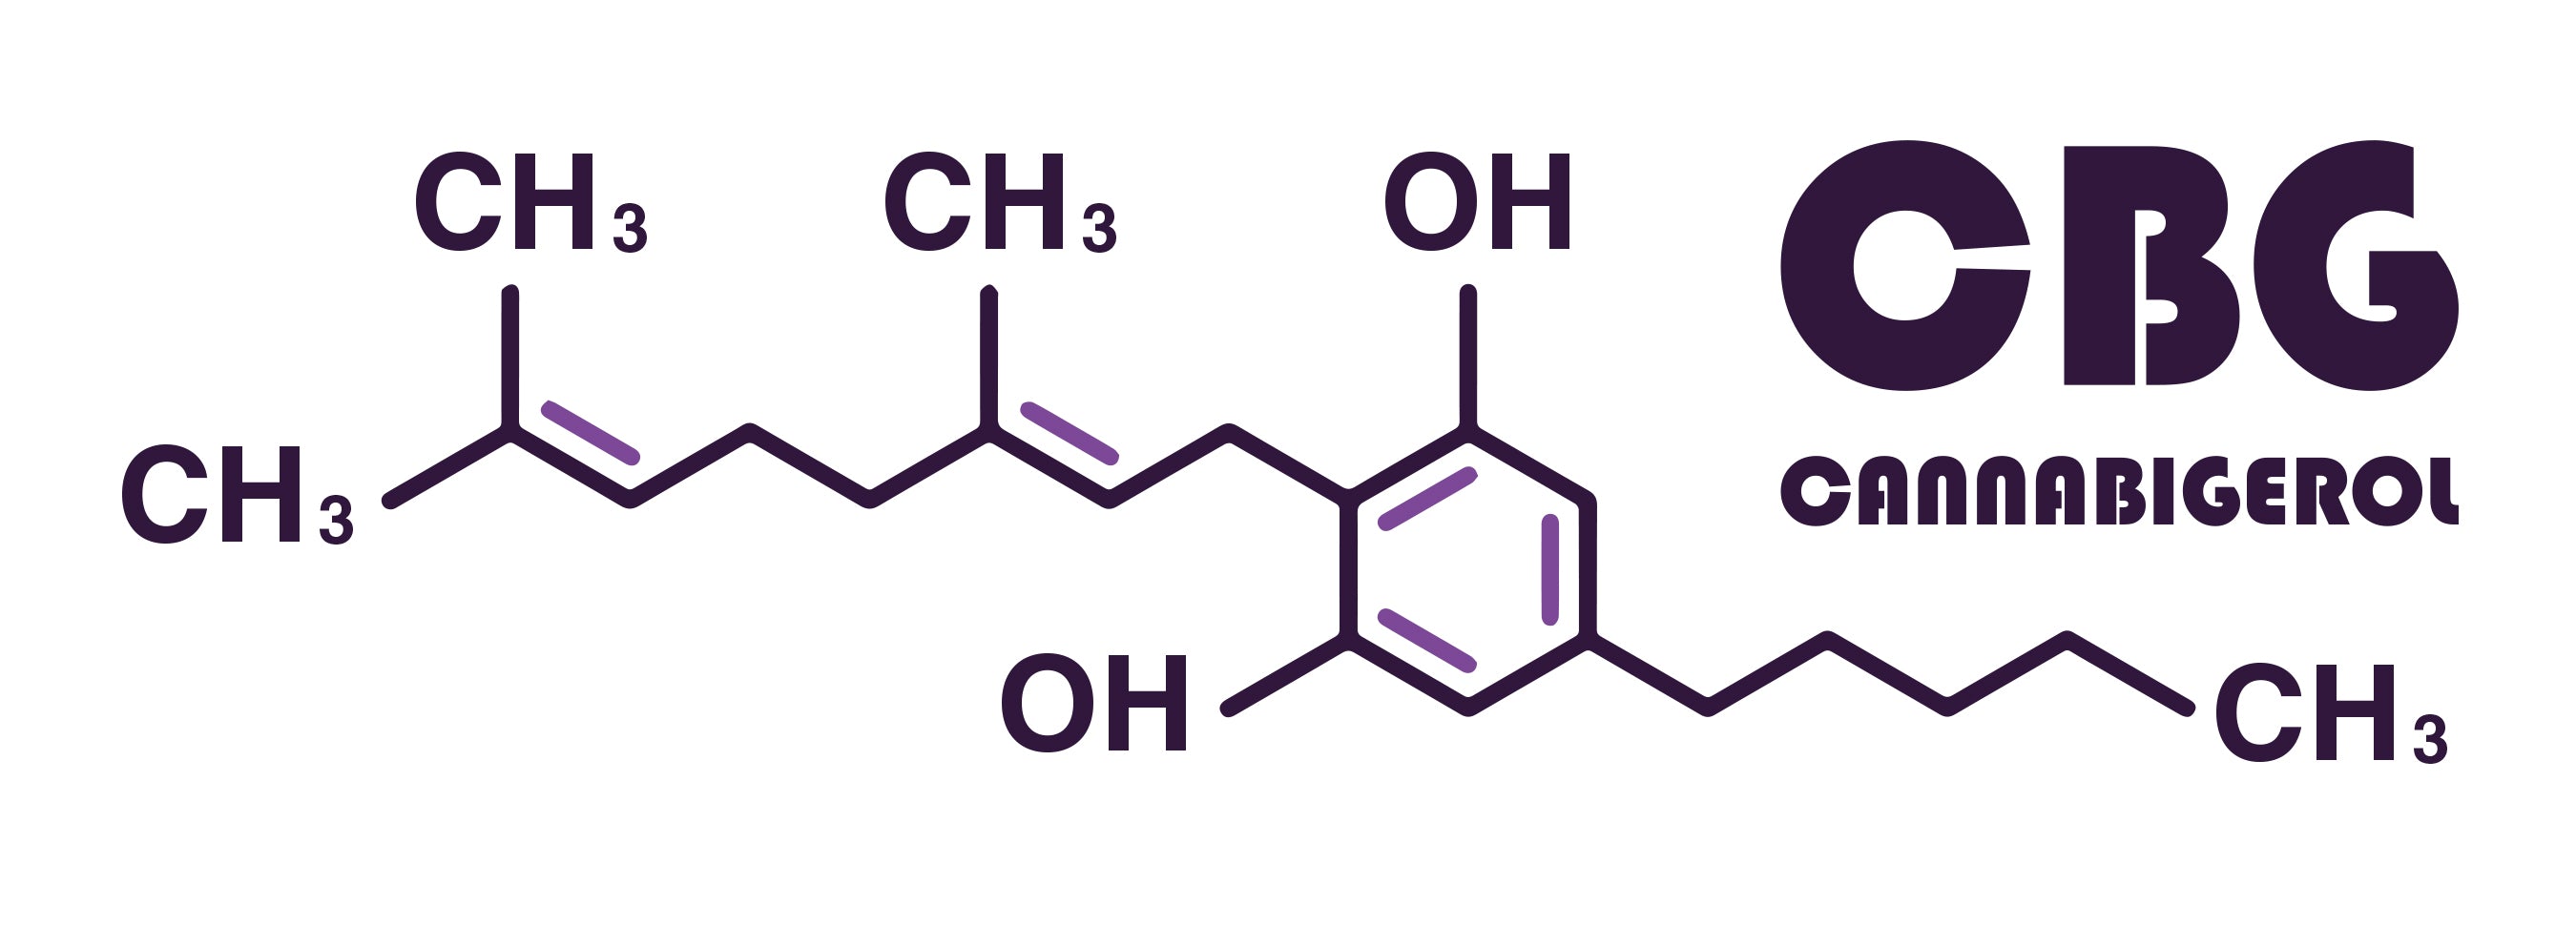 the structure of a CBD molecule, the formular is C21 H32 O2